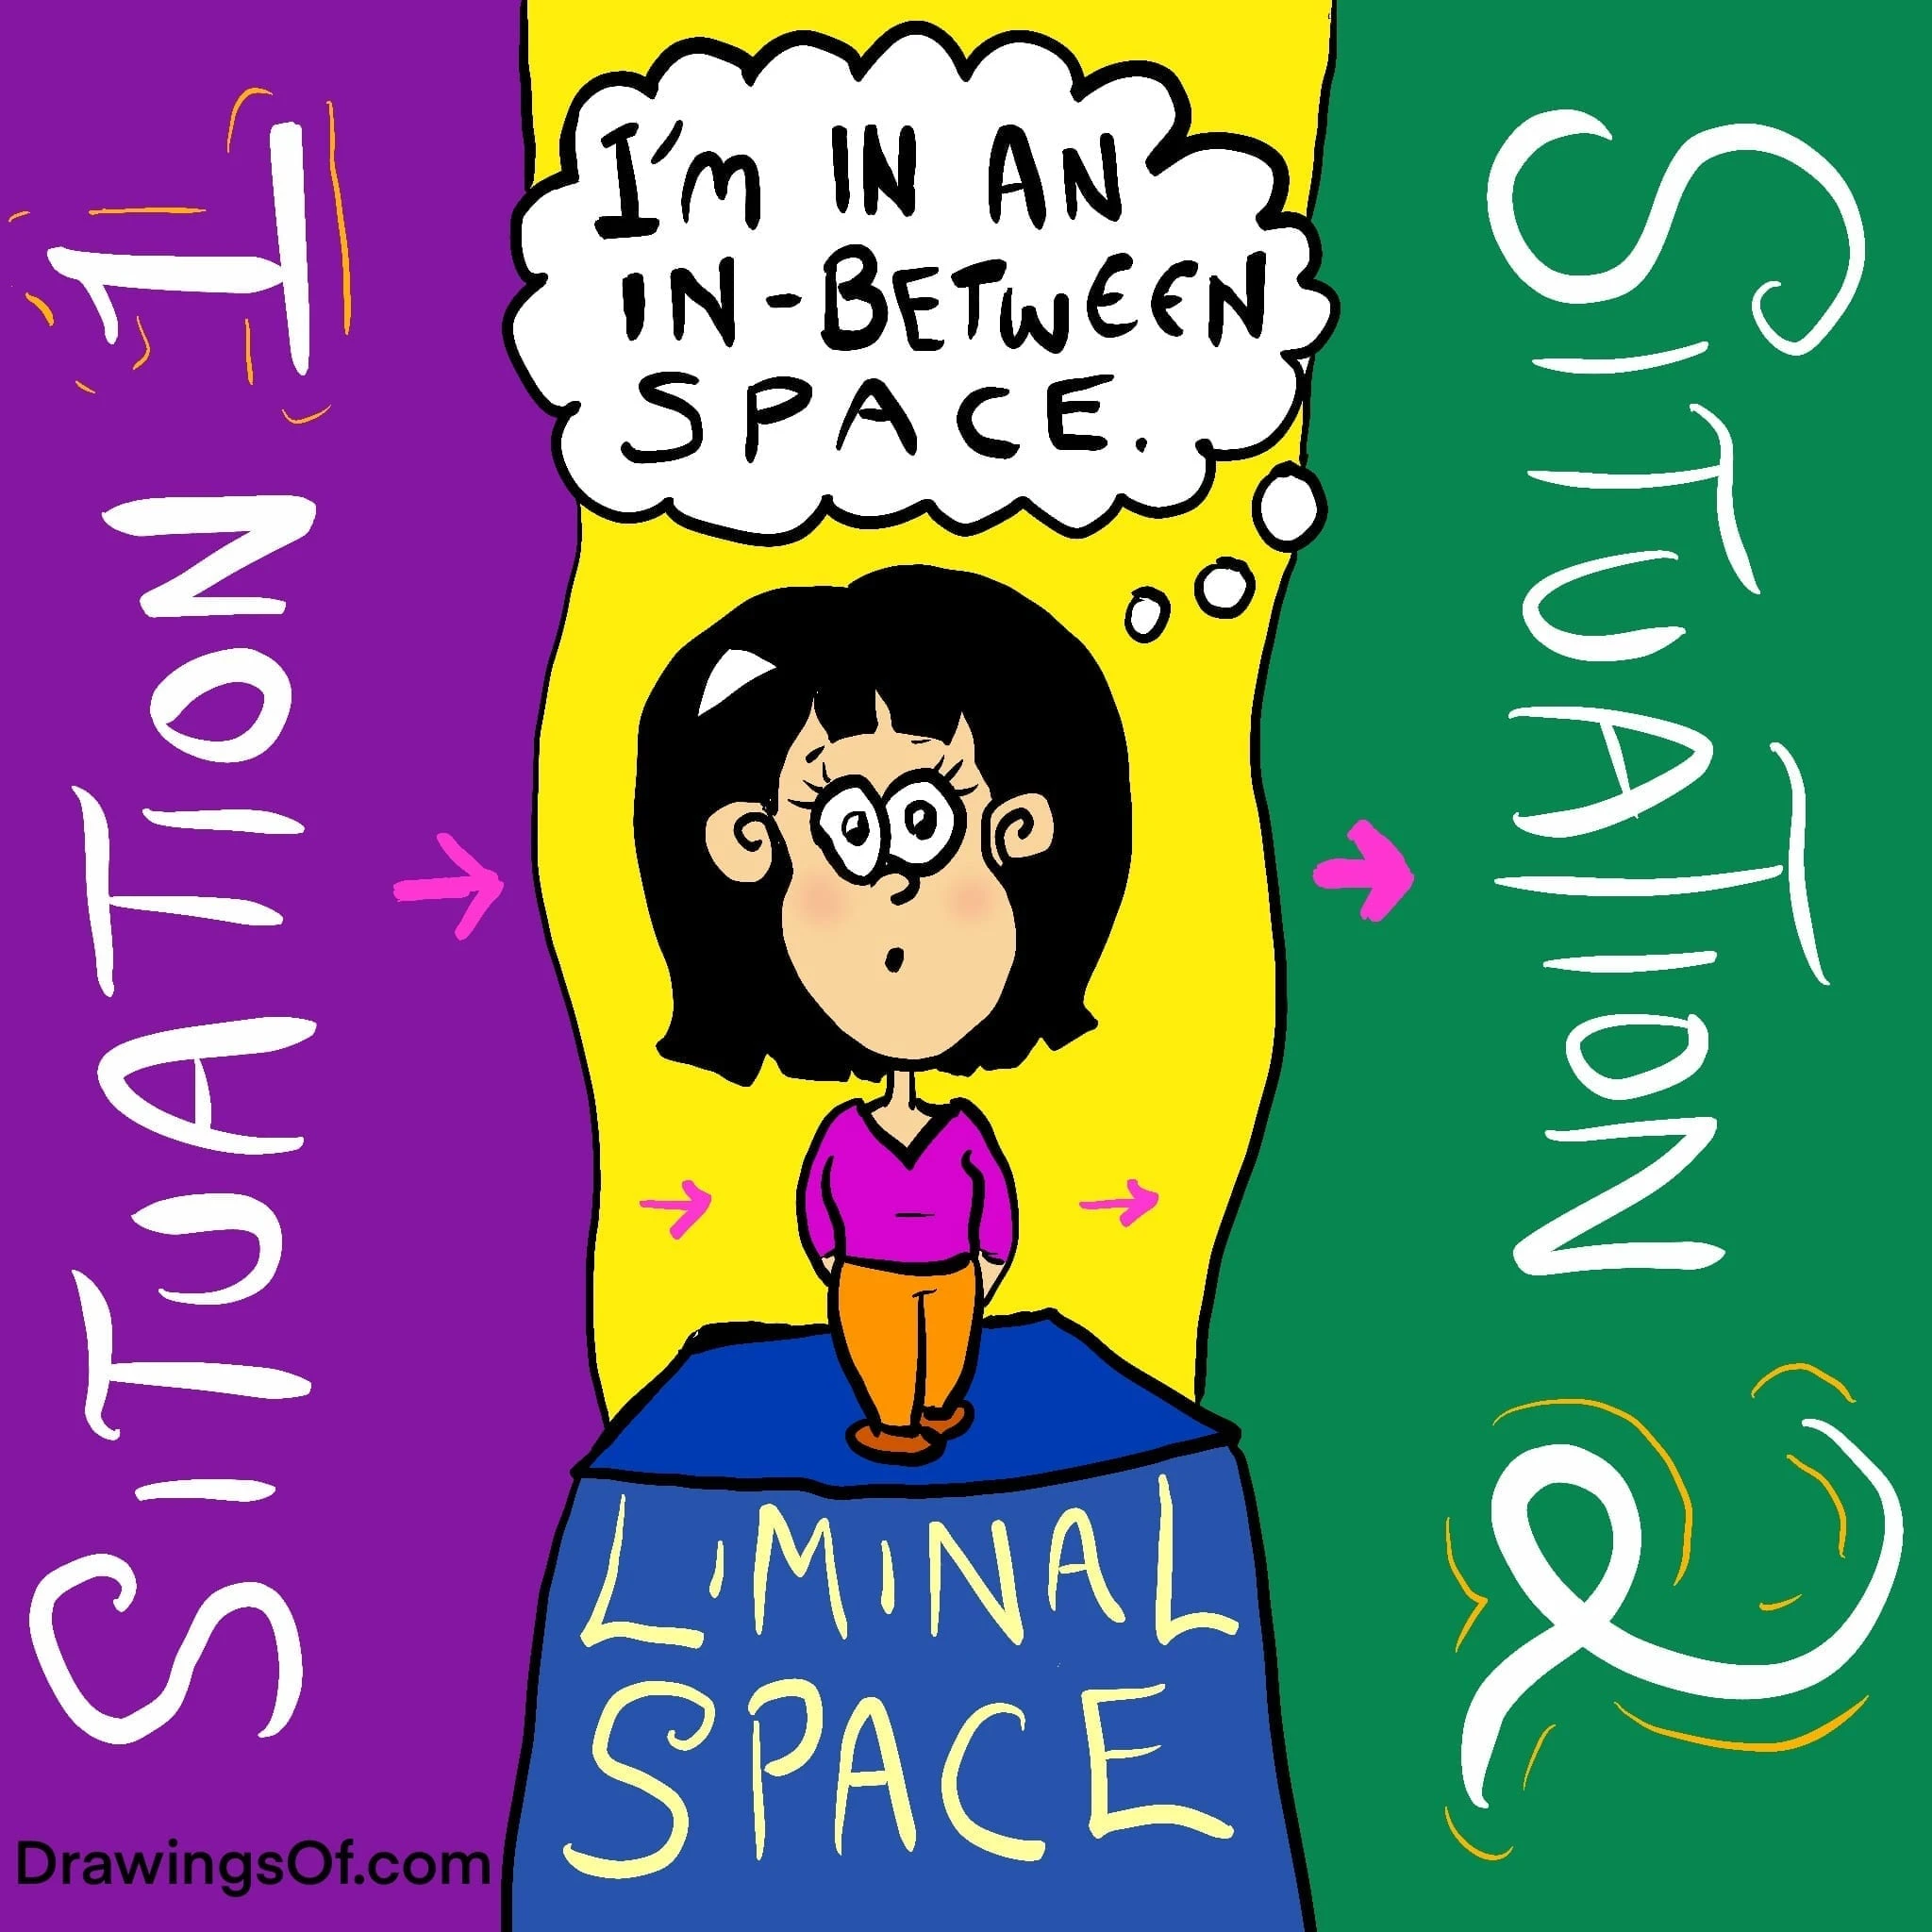 Liminal space